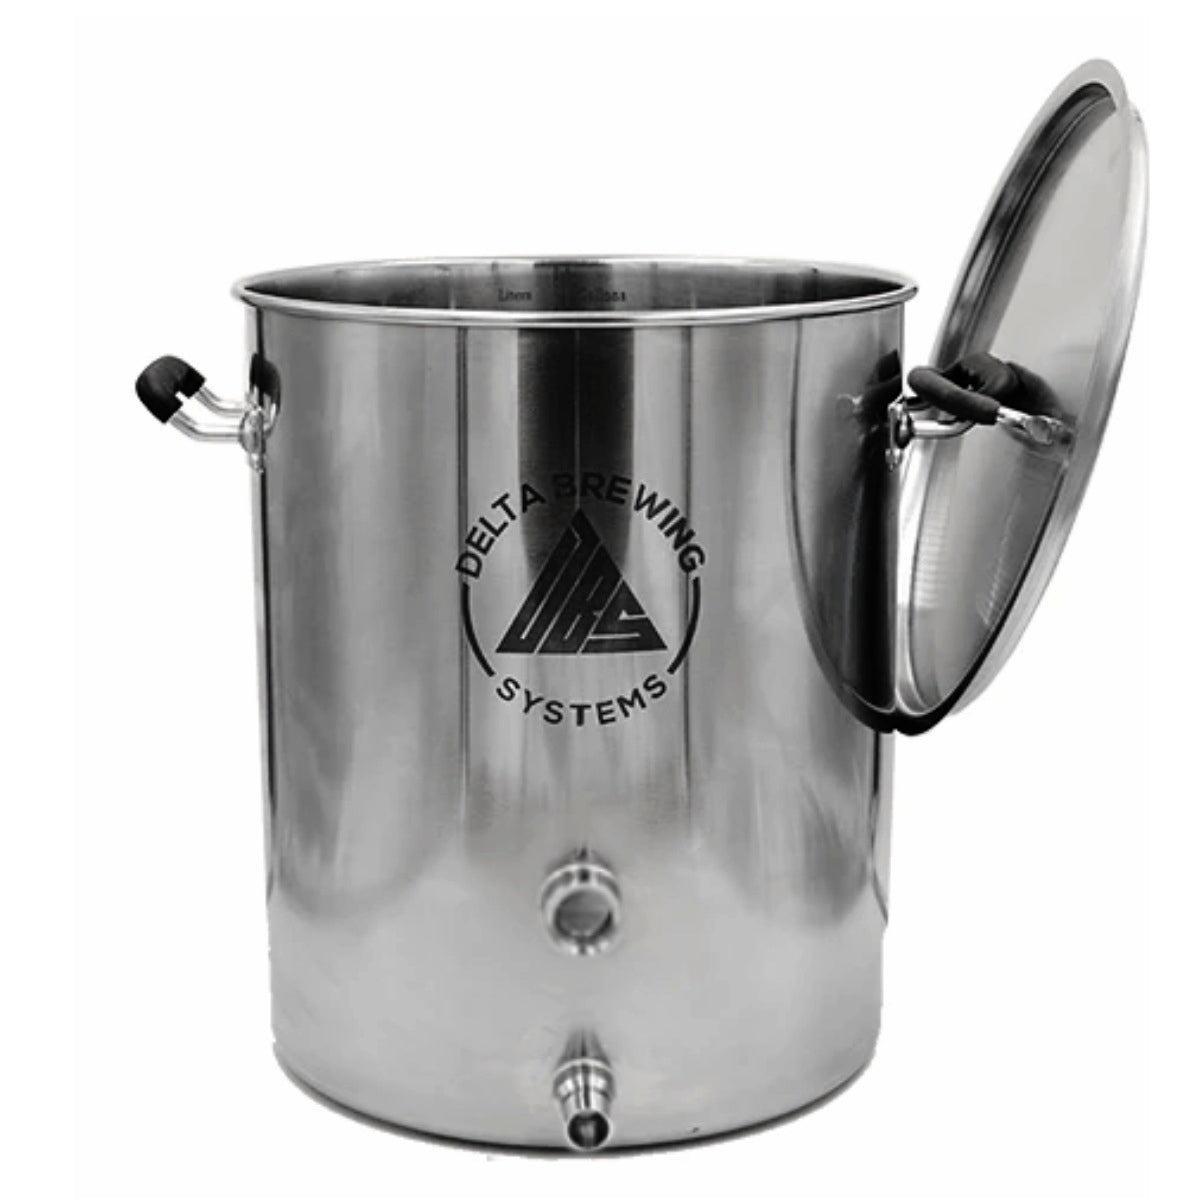 6 gallon brew Kettle - stainless steel